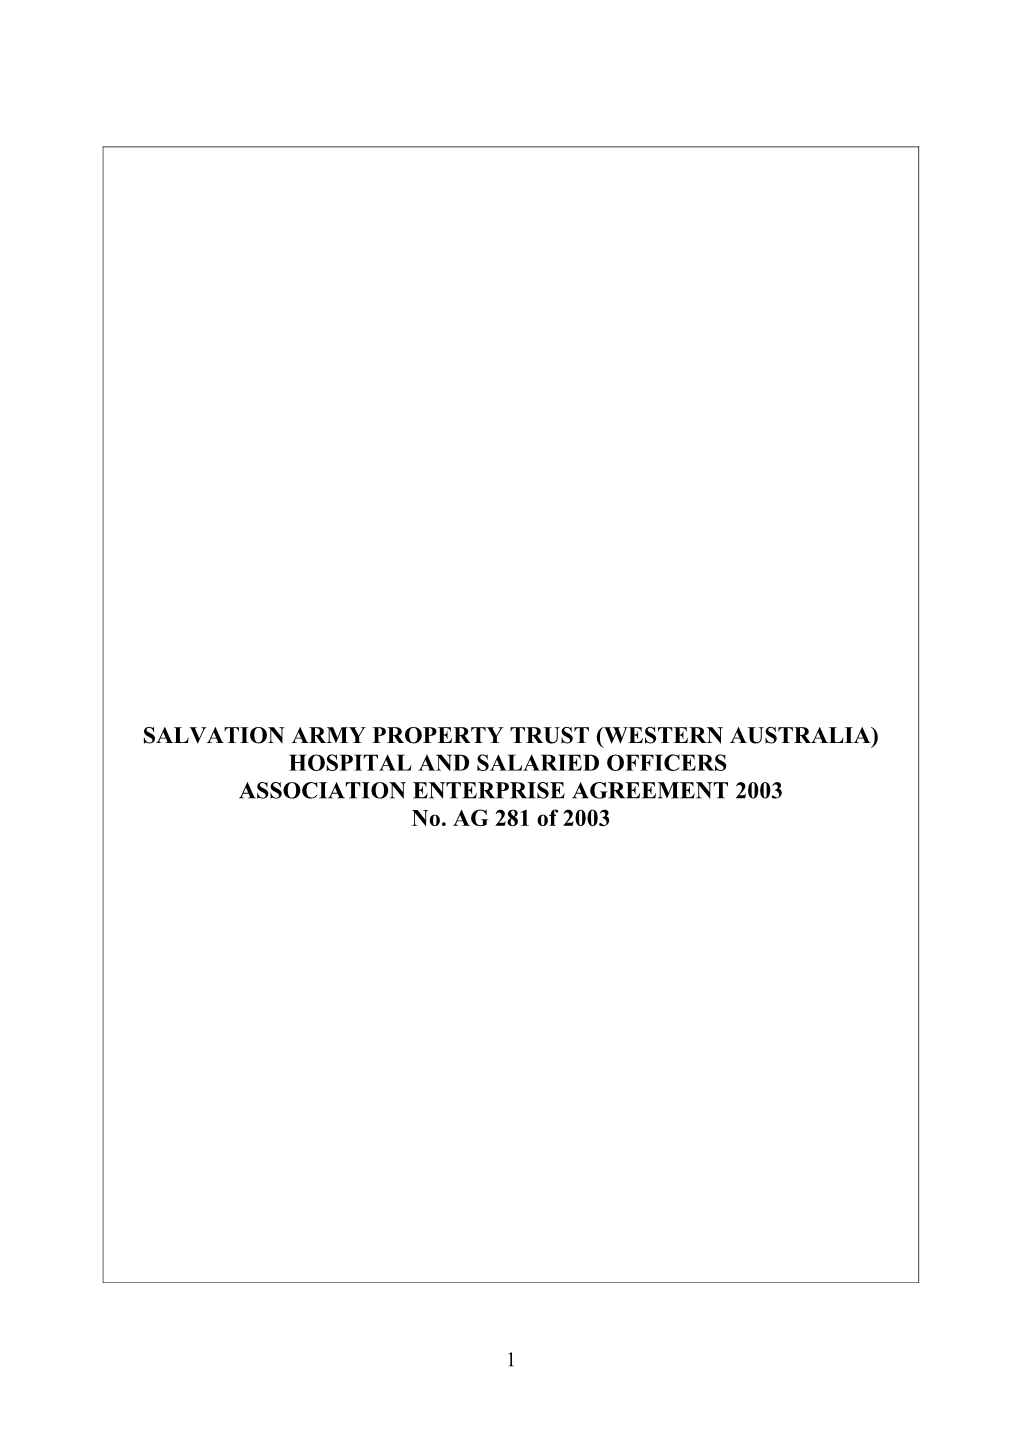 Salvation Army Property Trust (Western Australia) Hospital and Salaried Officers Association